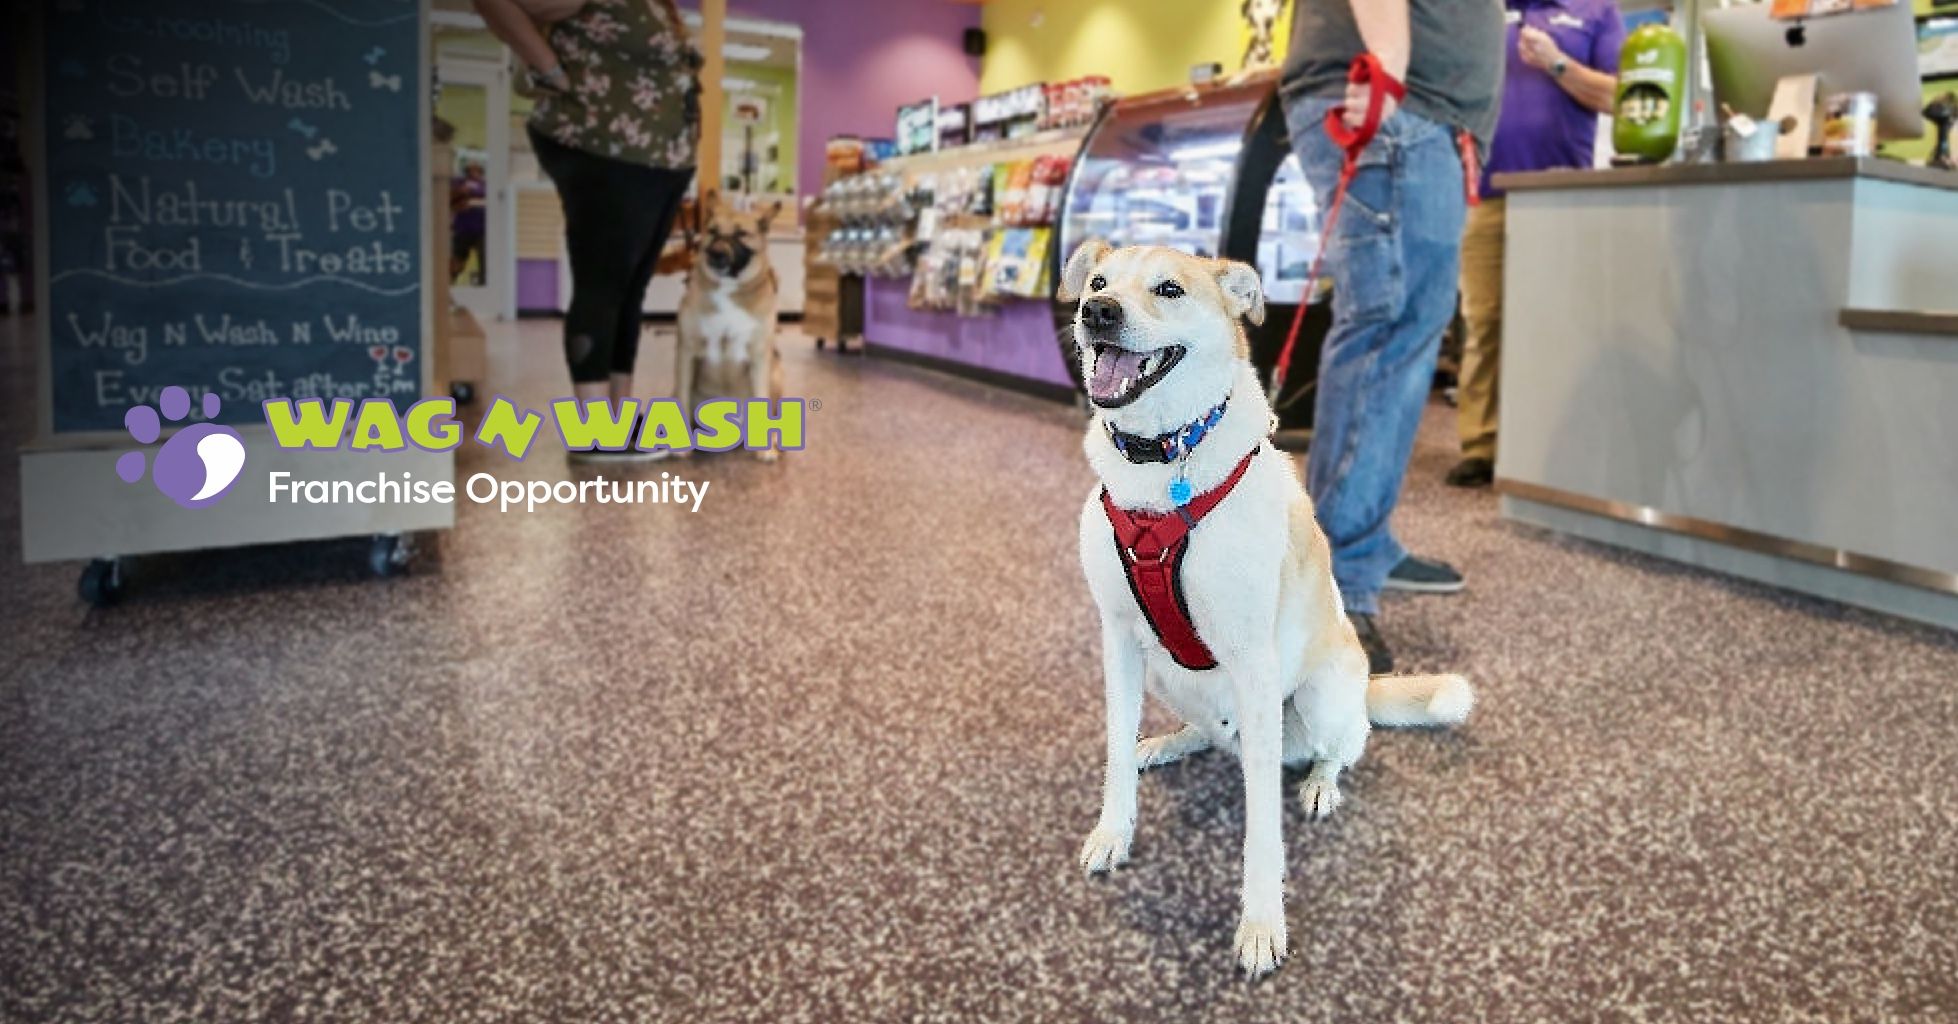 Dog smiling for a photo in a Wag N Wash store, a Dog Grooming Franchise